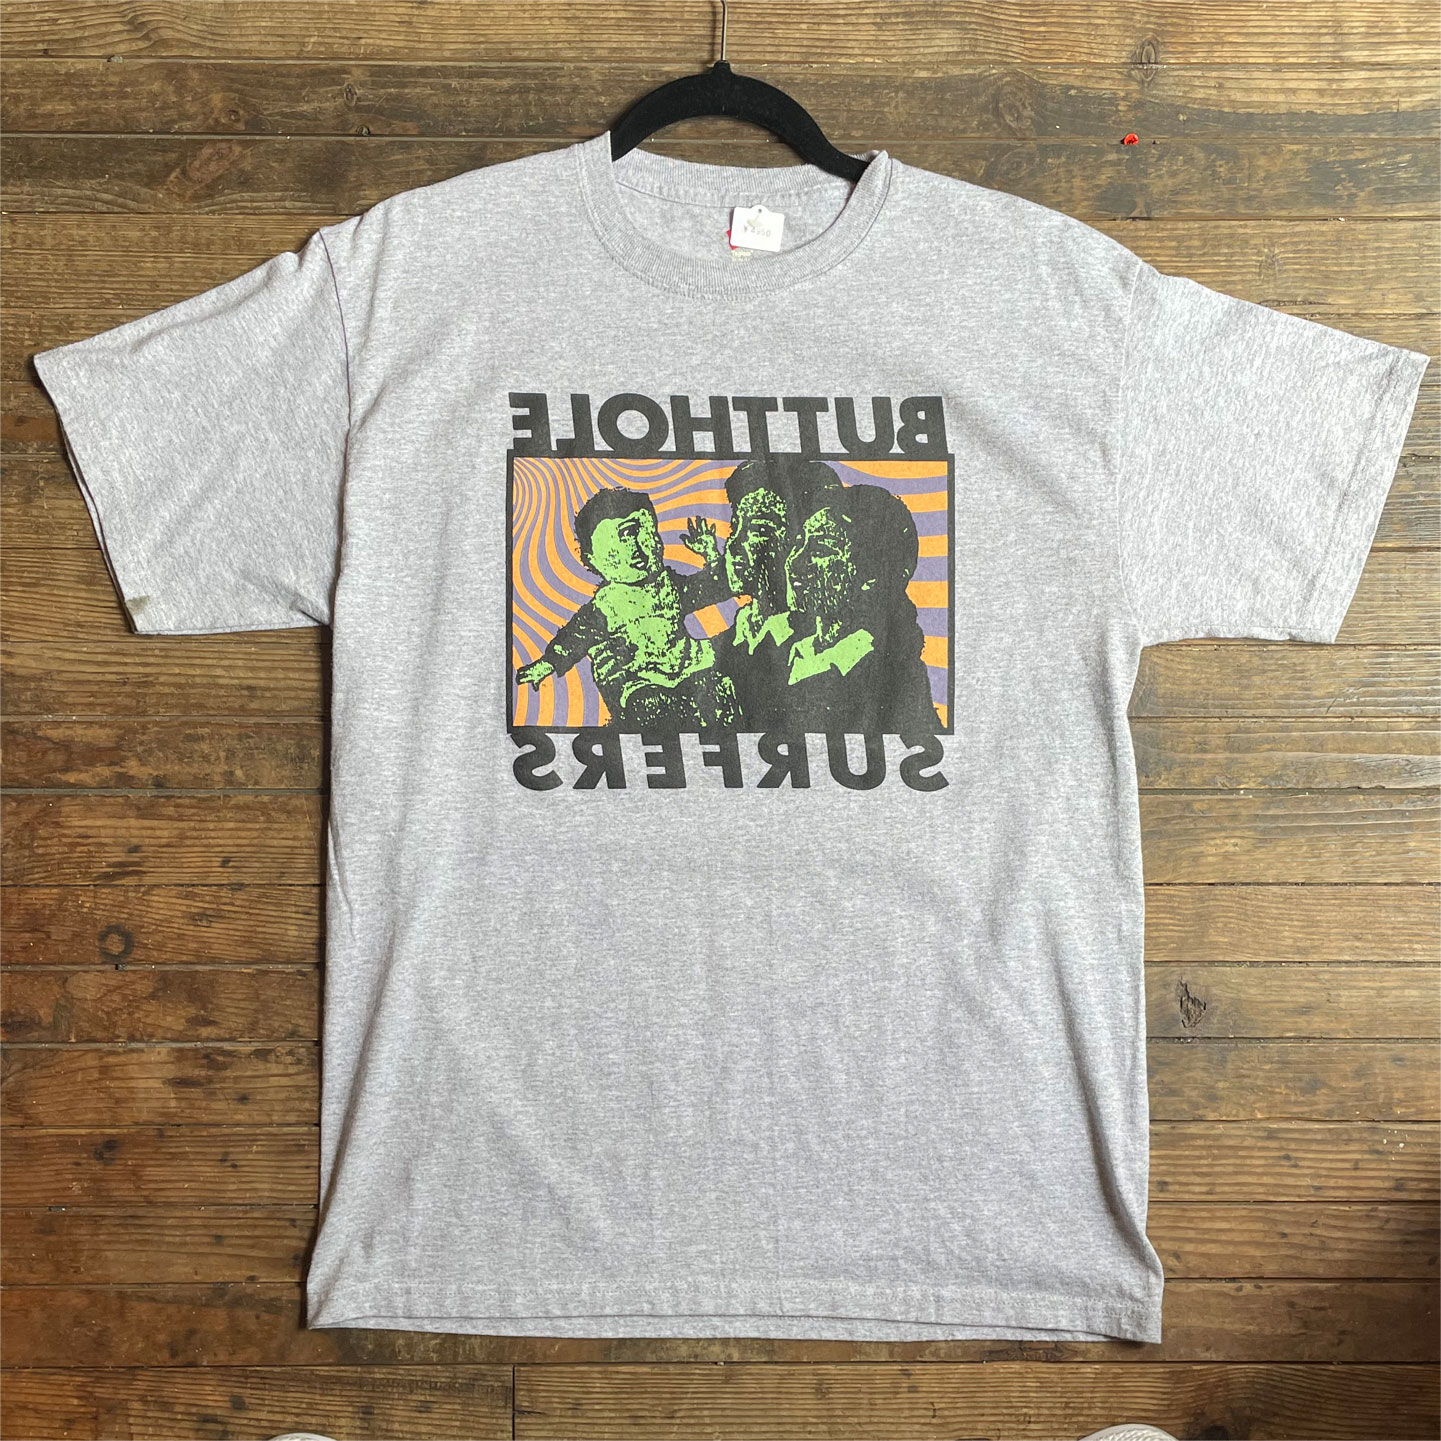 USED! BUTTHOLE SURFERS Tシャツ | 45REVOLUTION